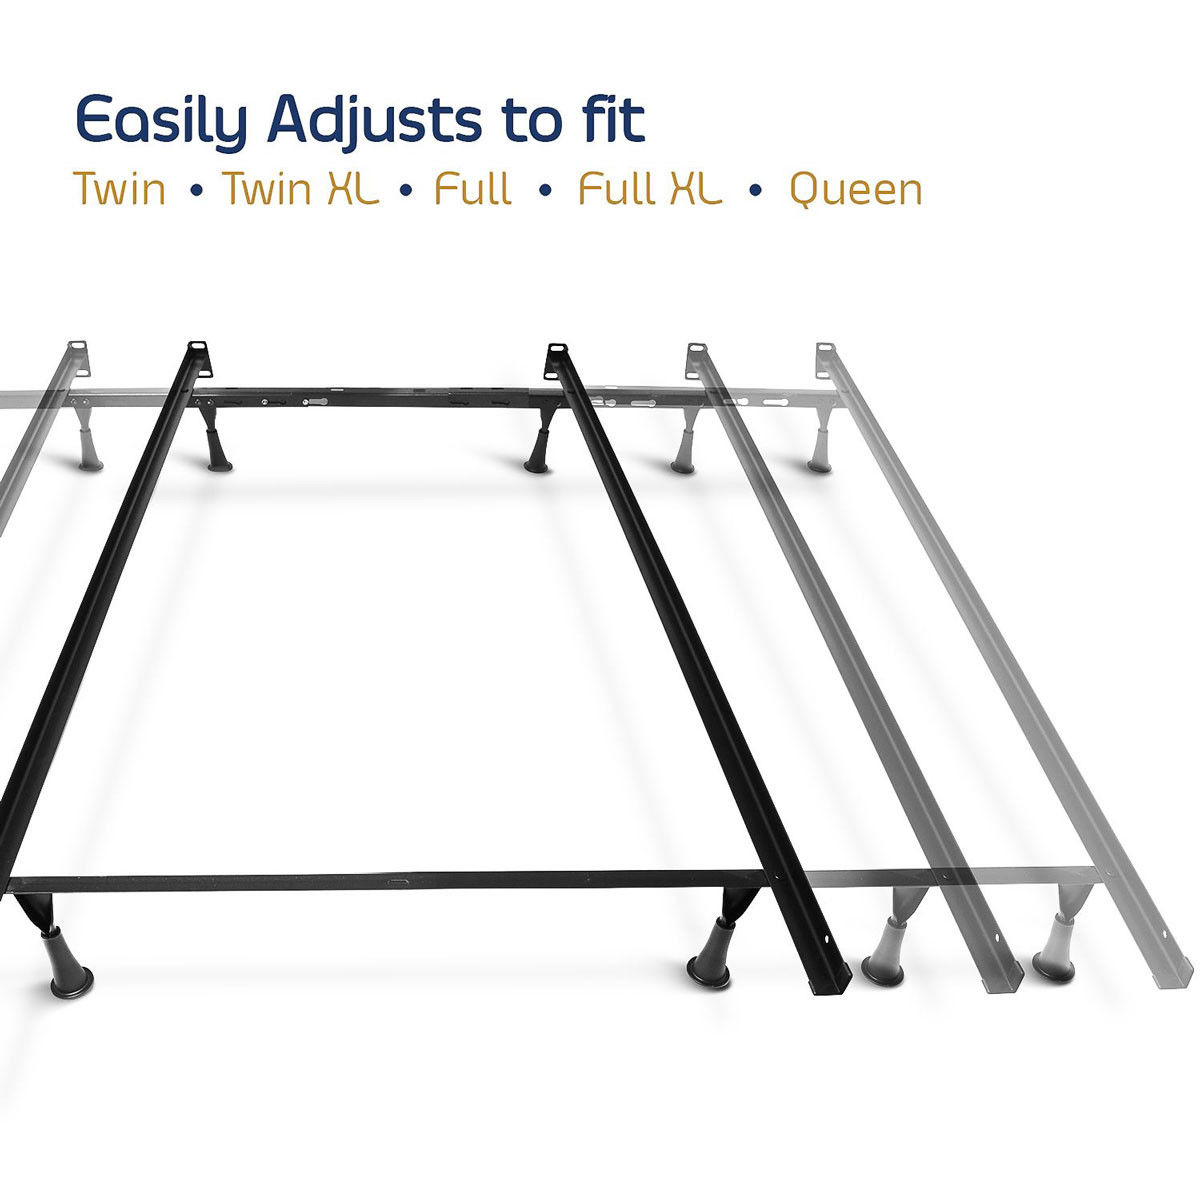 Are the metal bed frame pieces easy to assemble?